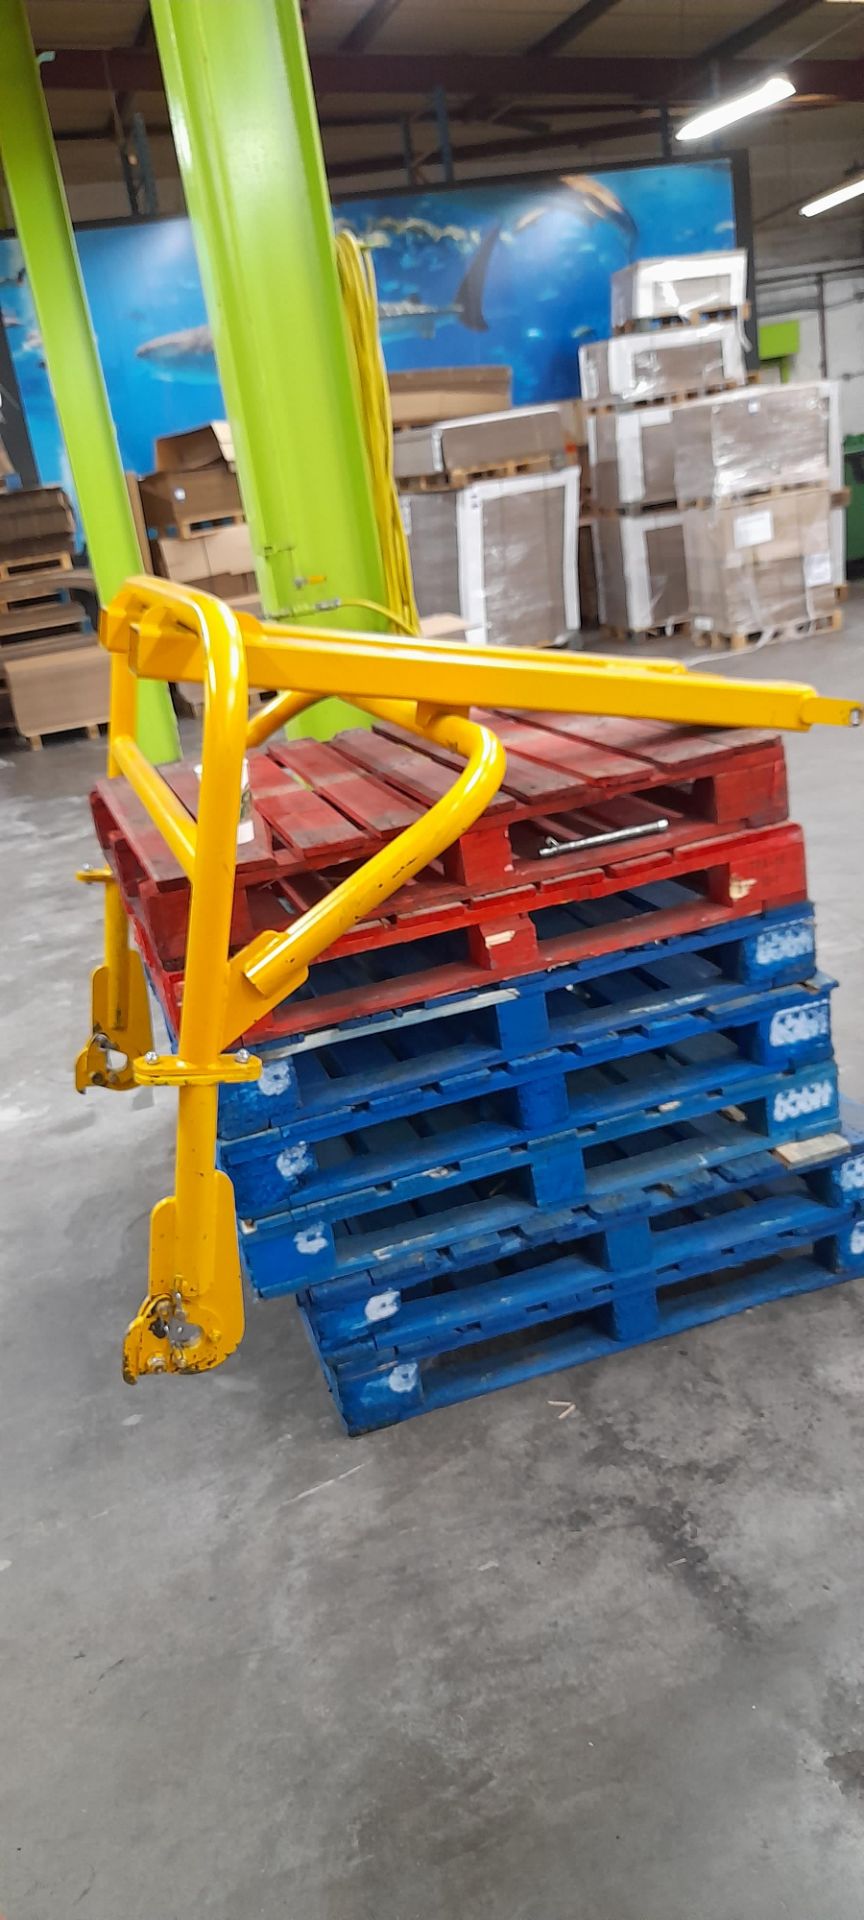 Contact LBH - 1100L Forklift Bin Tipping Attachment. (July 2021)